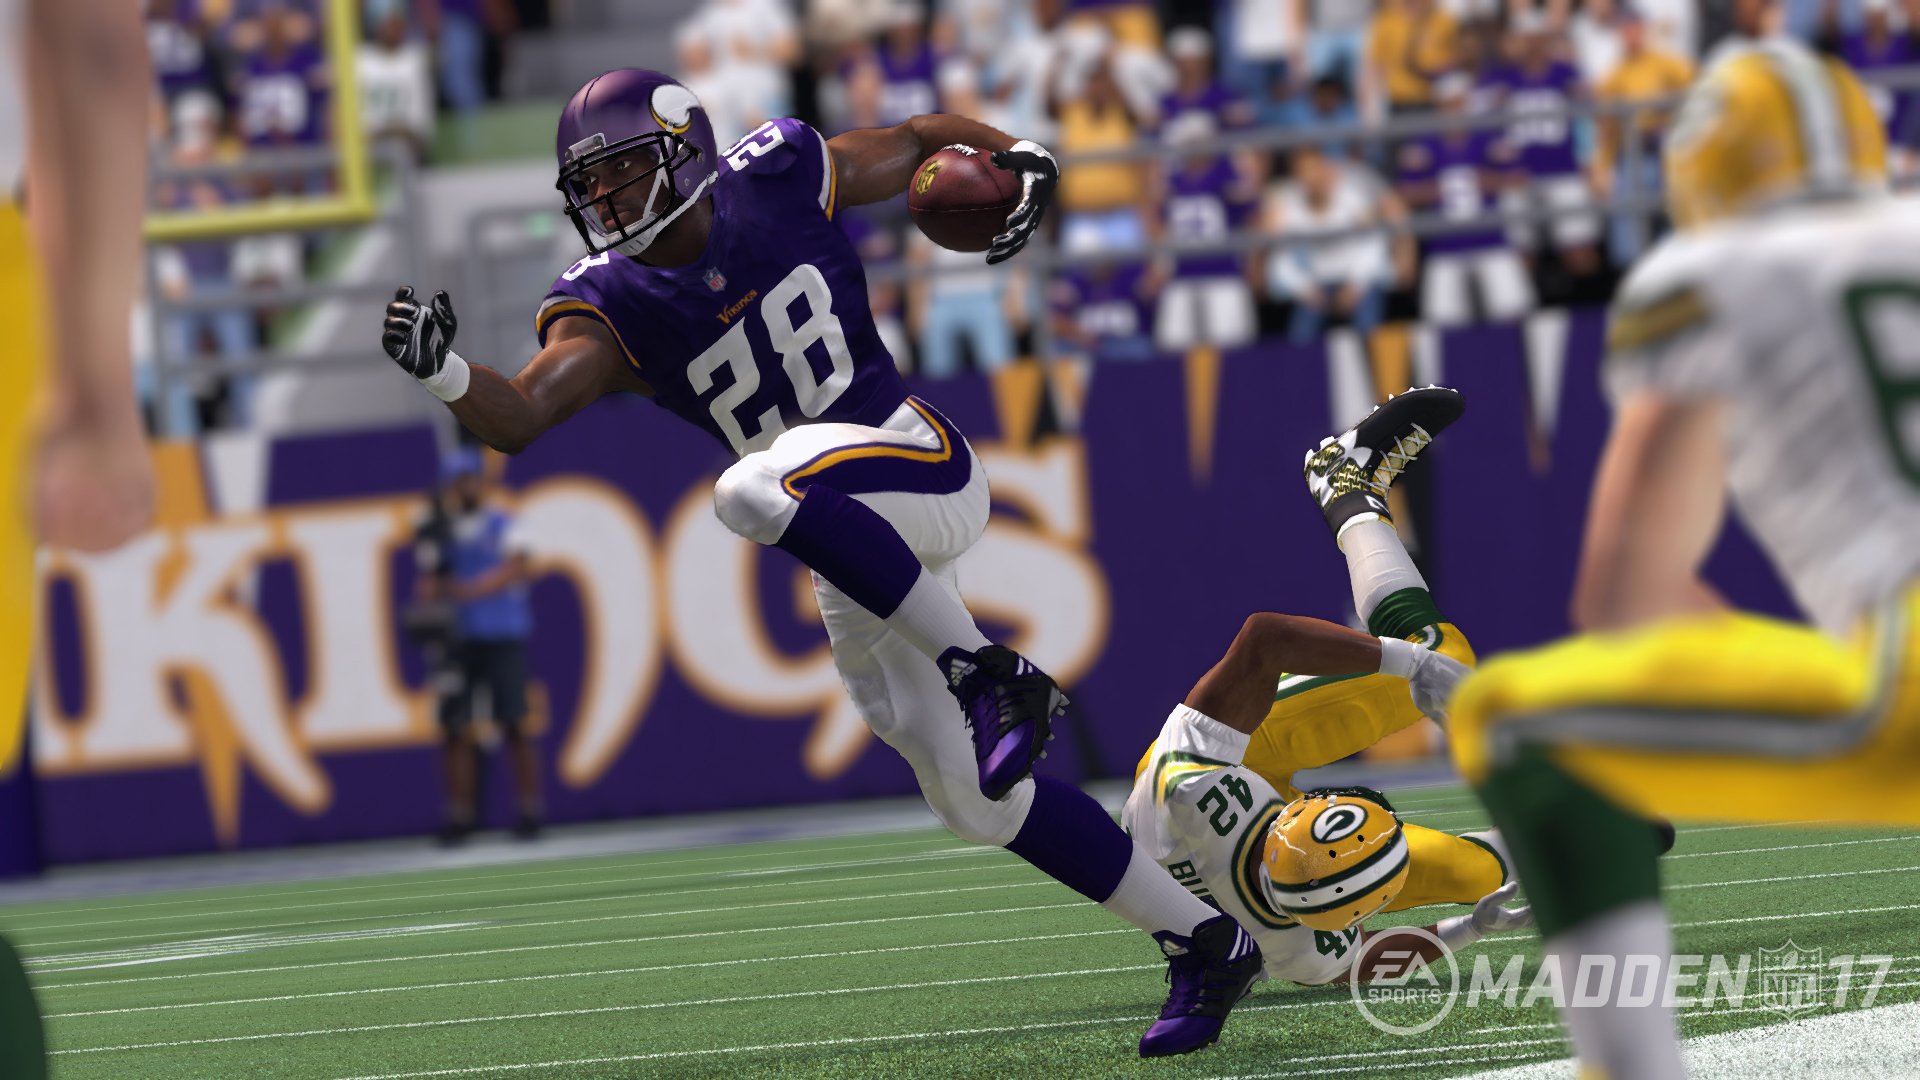 Madden nfl on which rb are you most excited to try the new ball carrier special moves with in madden httpstcoivrhrve